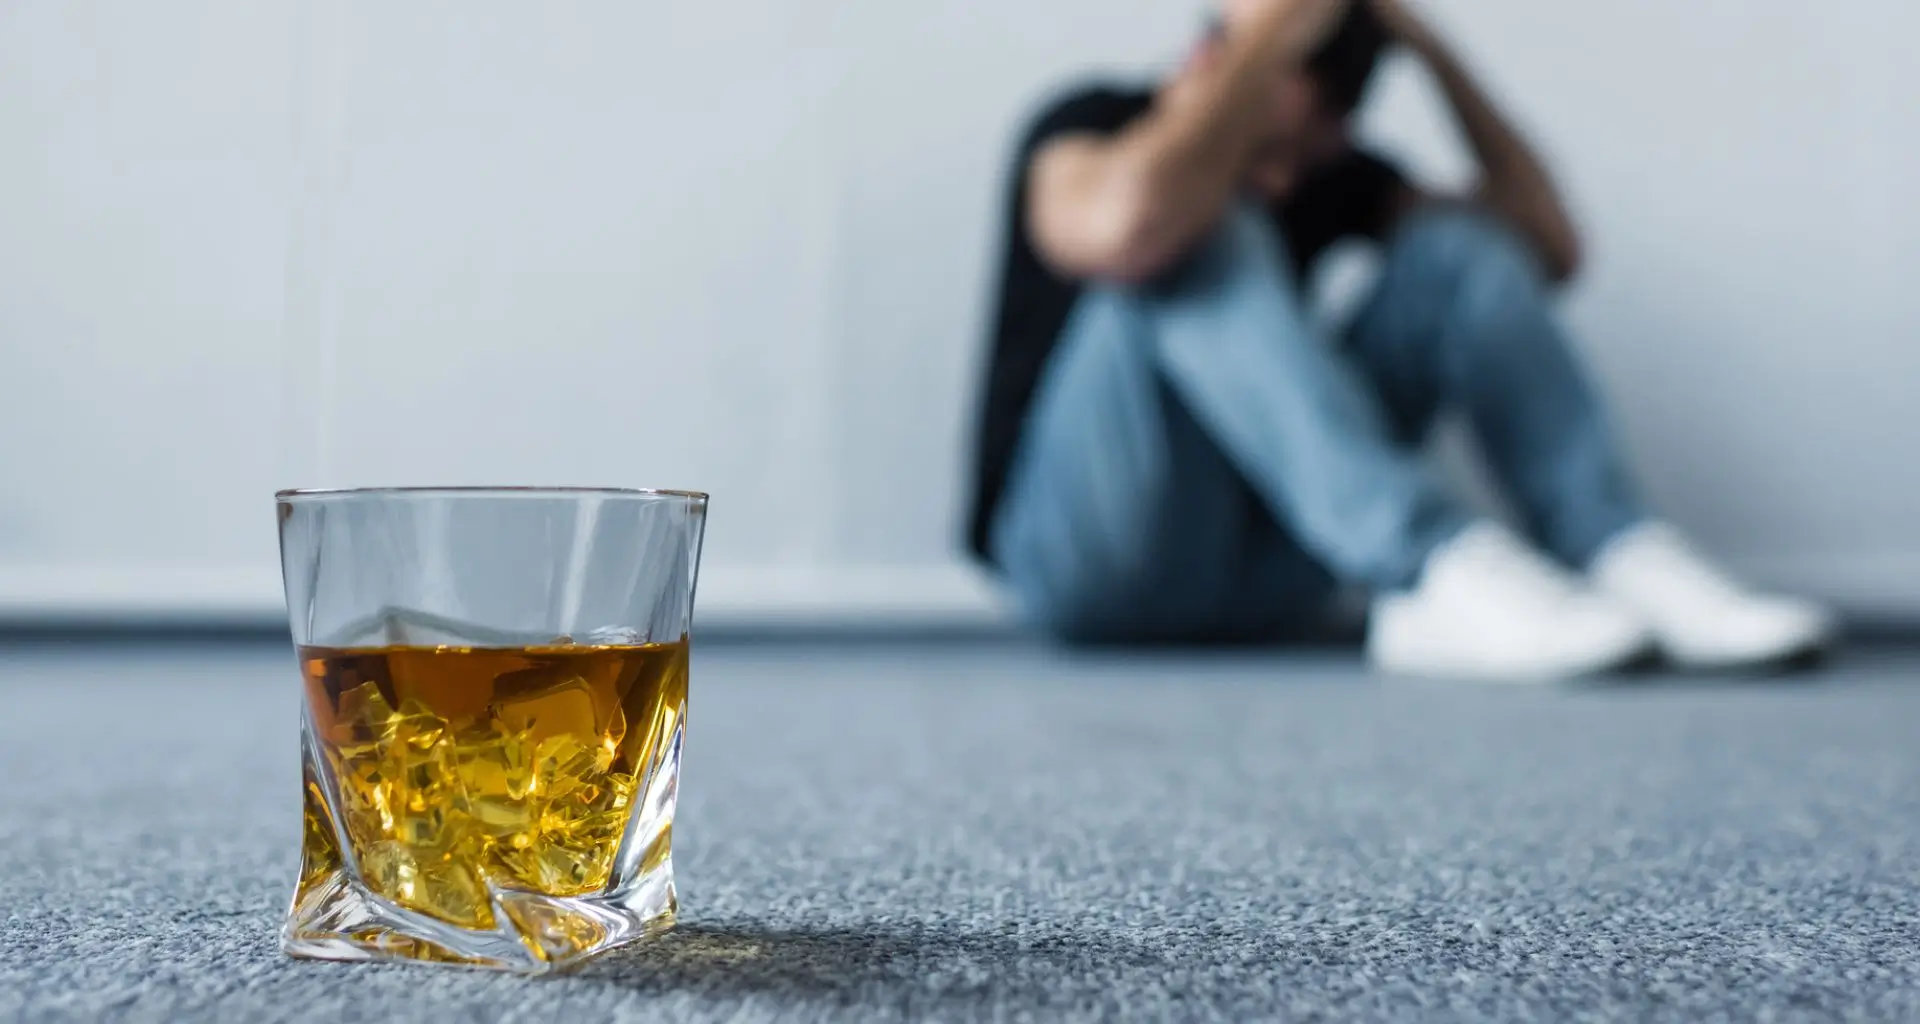 Close-up of a whiskey glass on the floor with a blurred background of a distressed man, underscoring the importance of alcohol testing in addressing substance abuse.